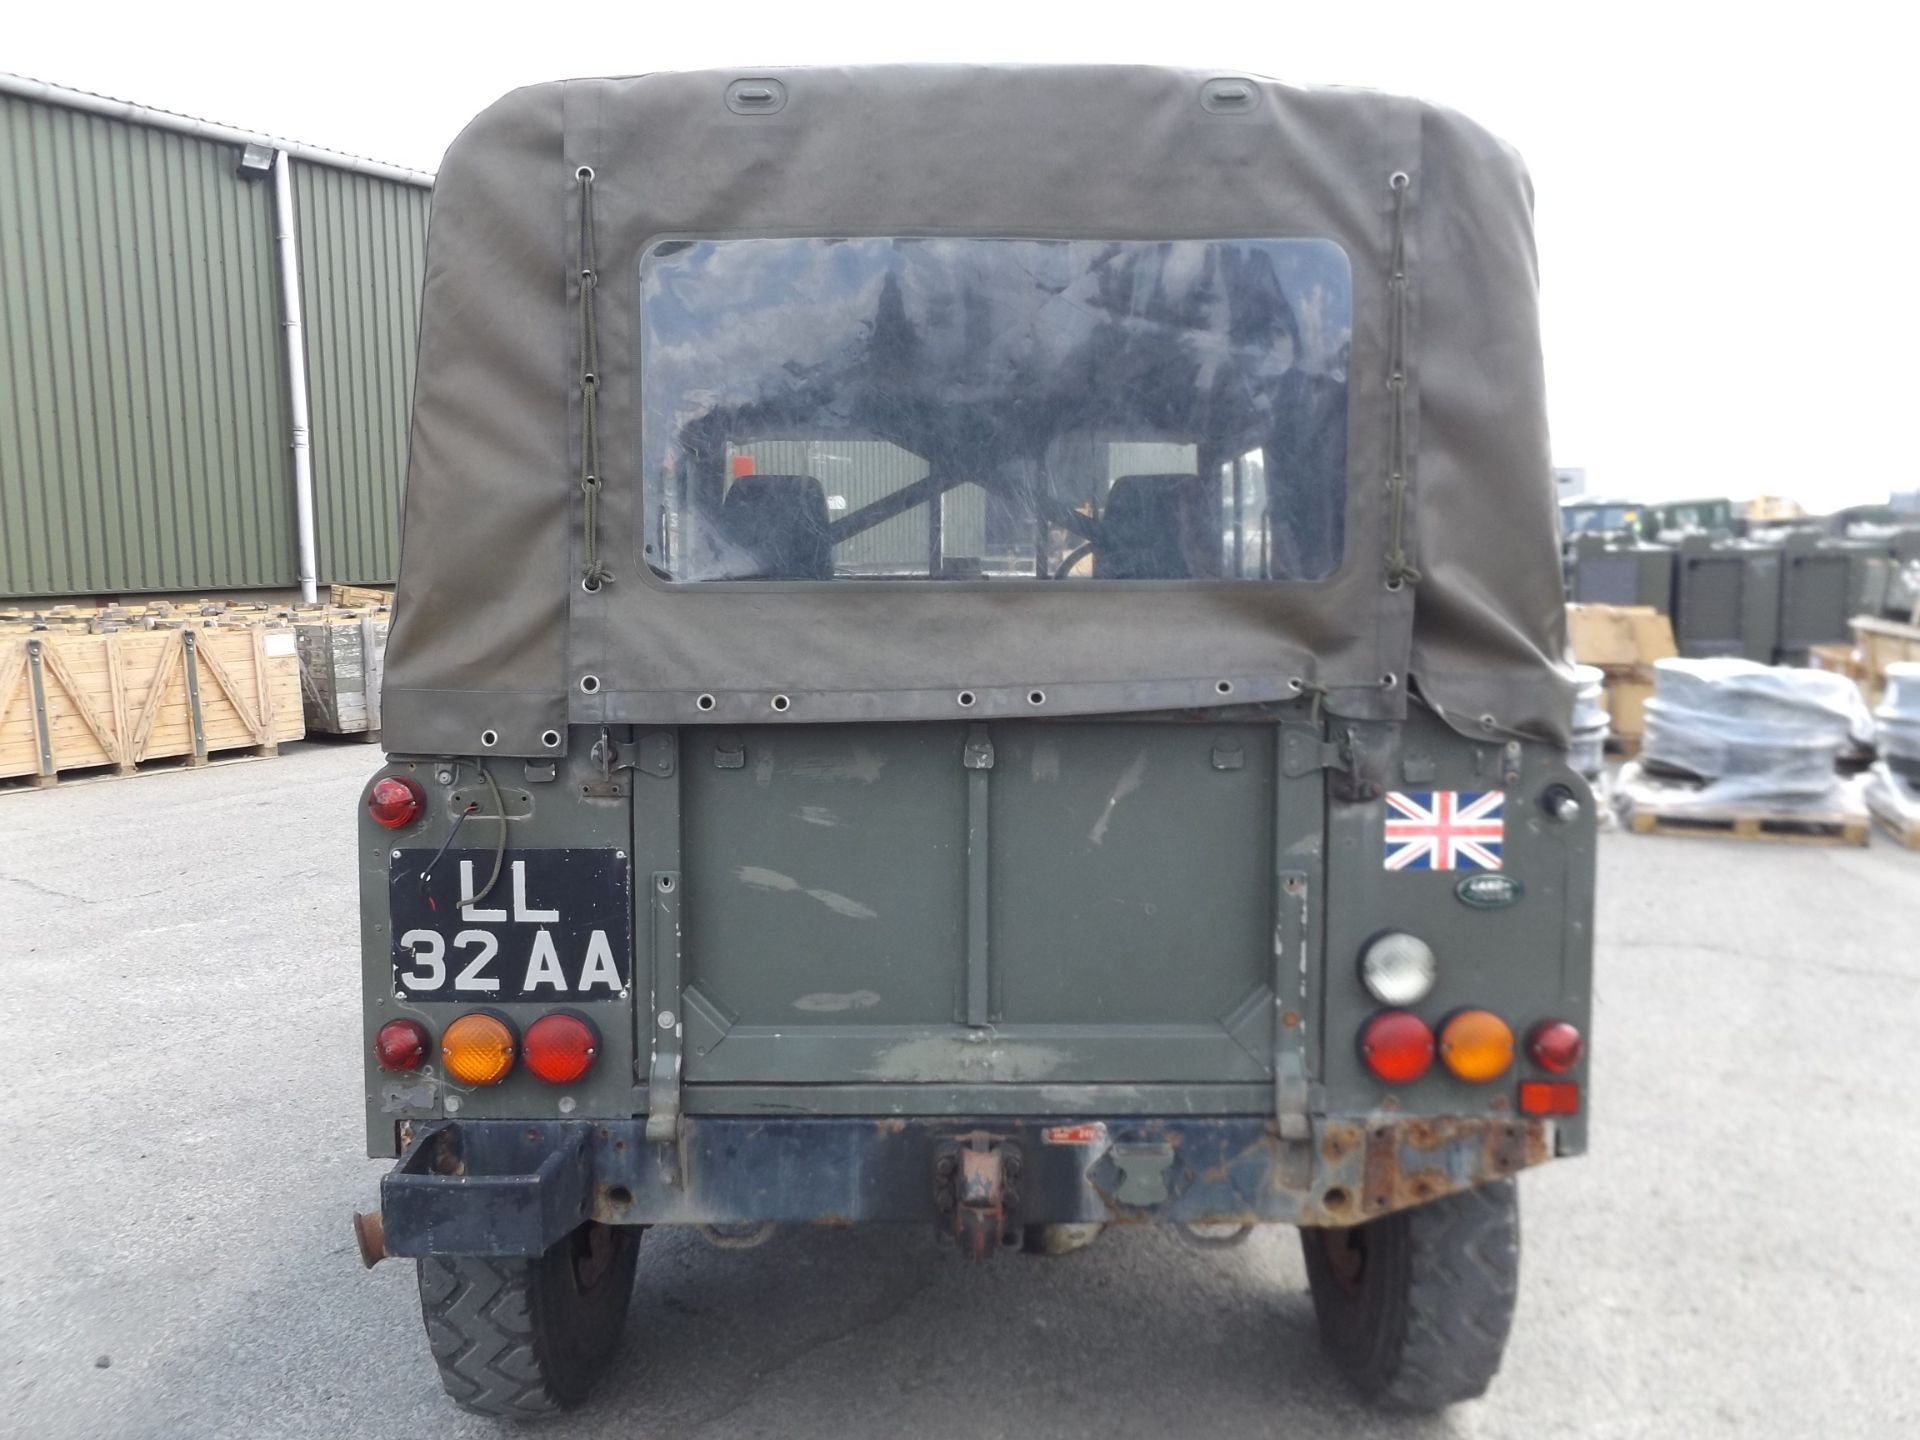 Military Specification Land Rover Wolf 90 Soft Top with Remus upgrade - Image 7 of 19